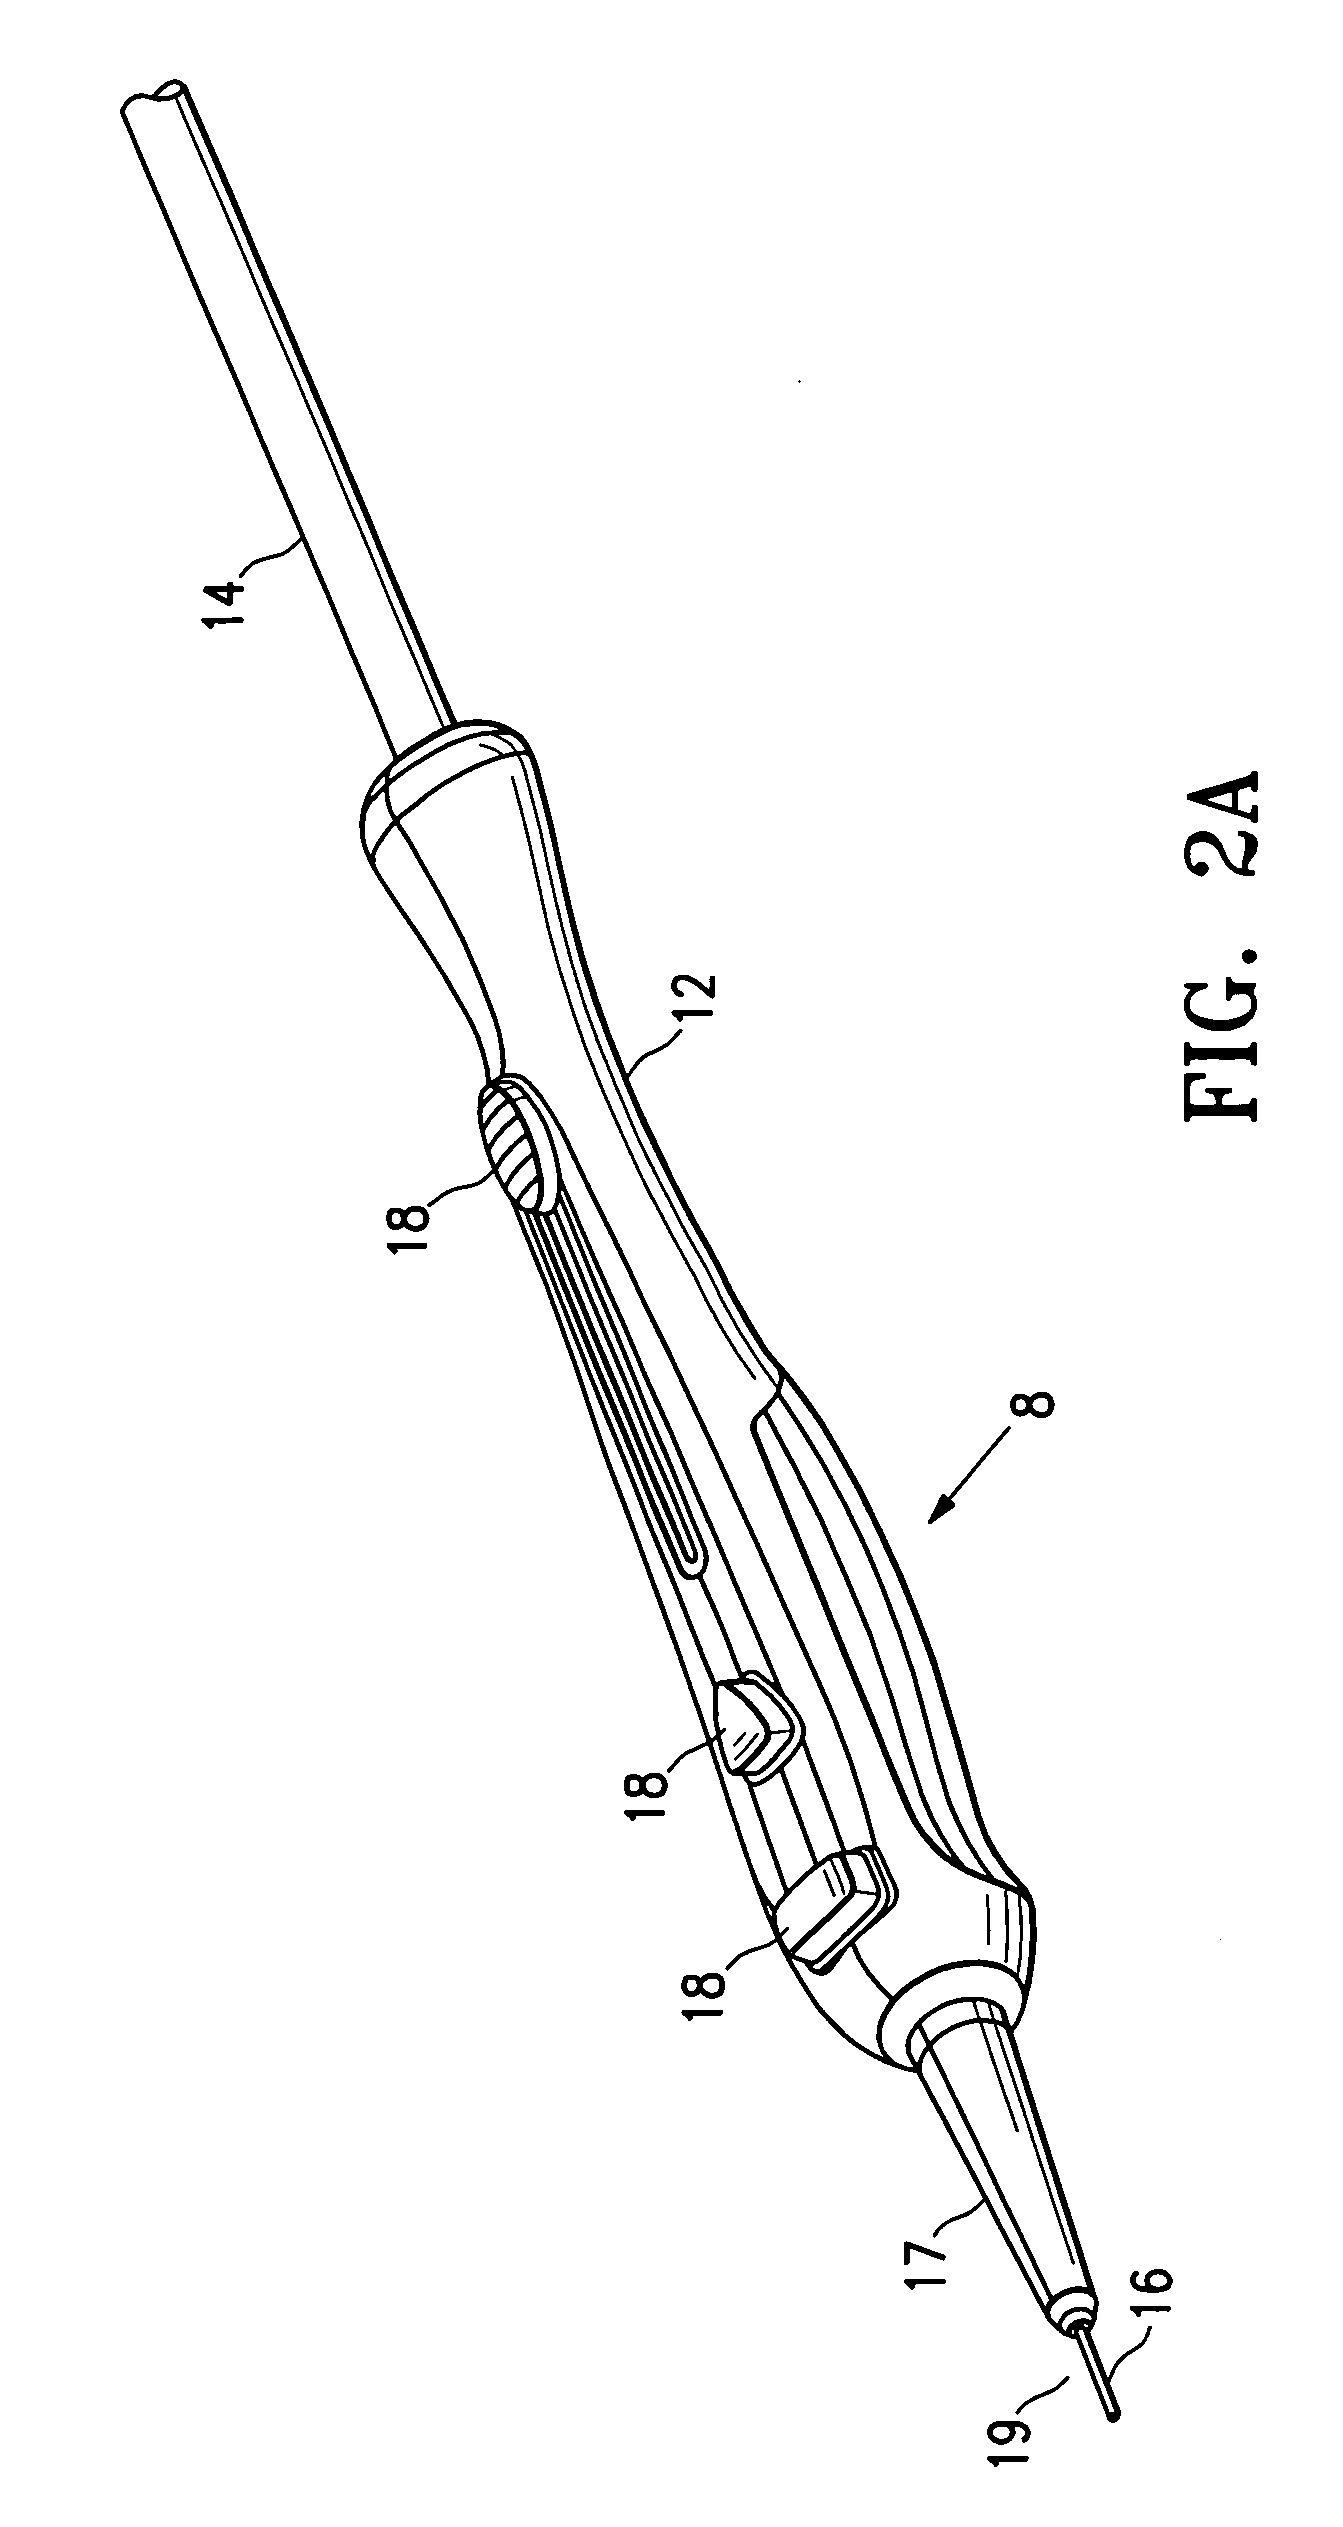 Electrosurgical medical system and method